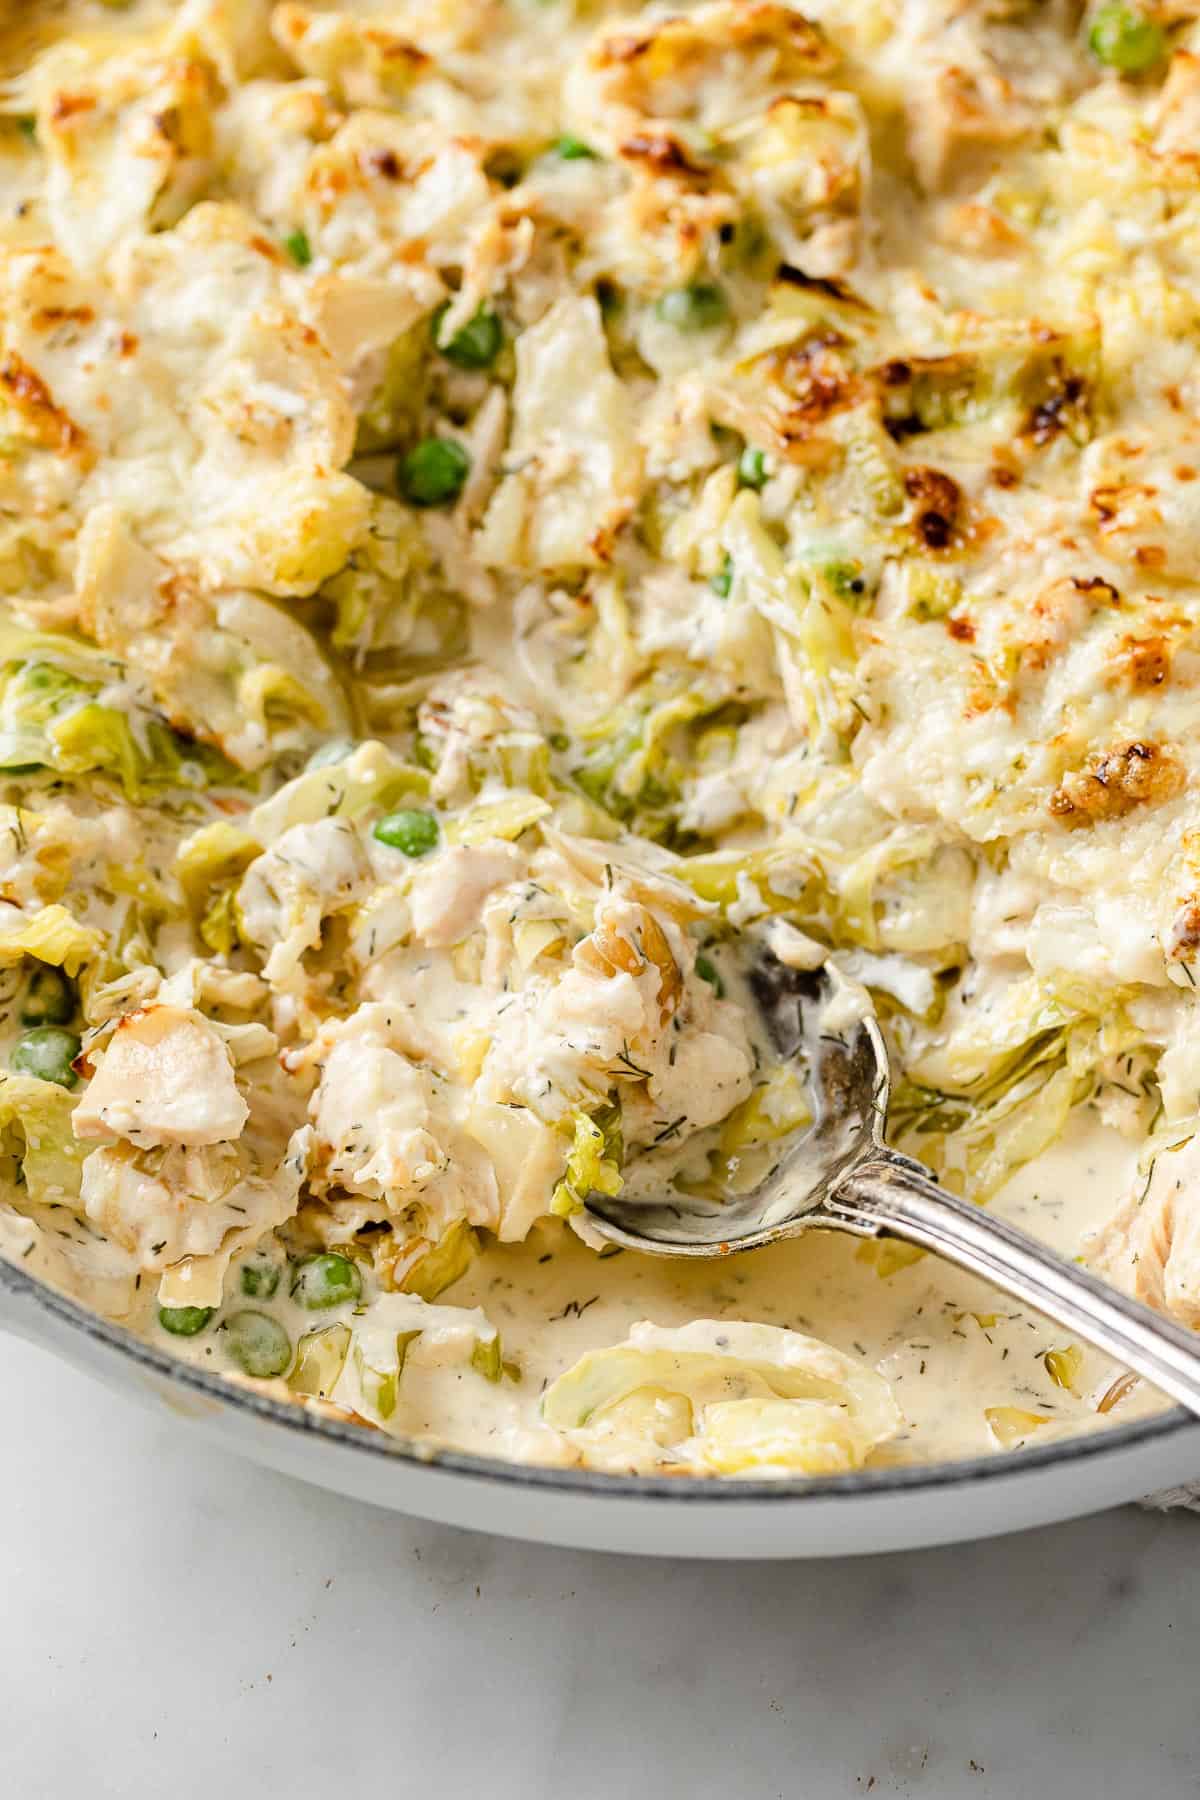 a skillet full of low carb tuna casserole, rich and creamy sauce, baked golden brown with cheese